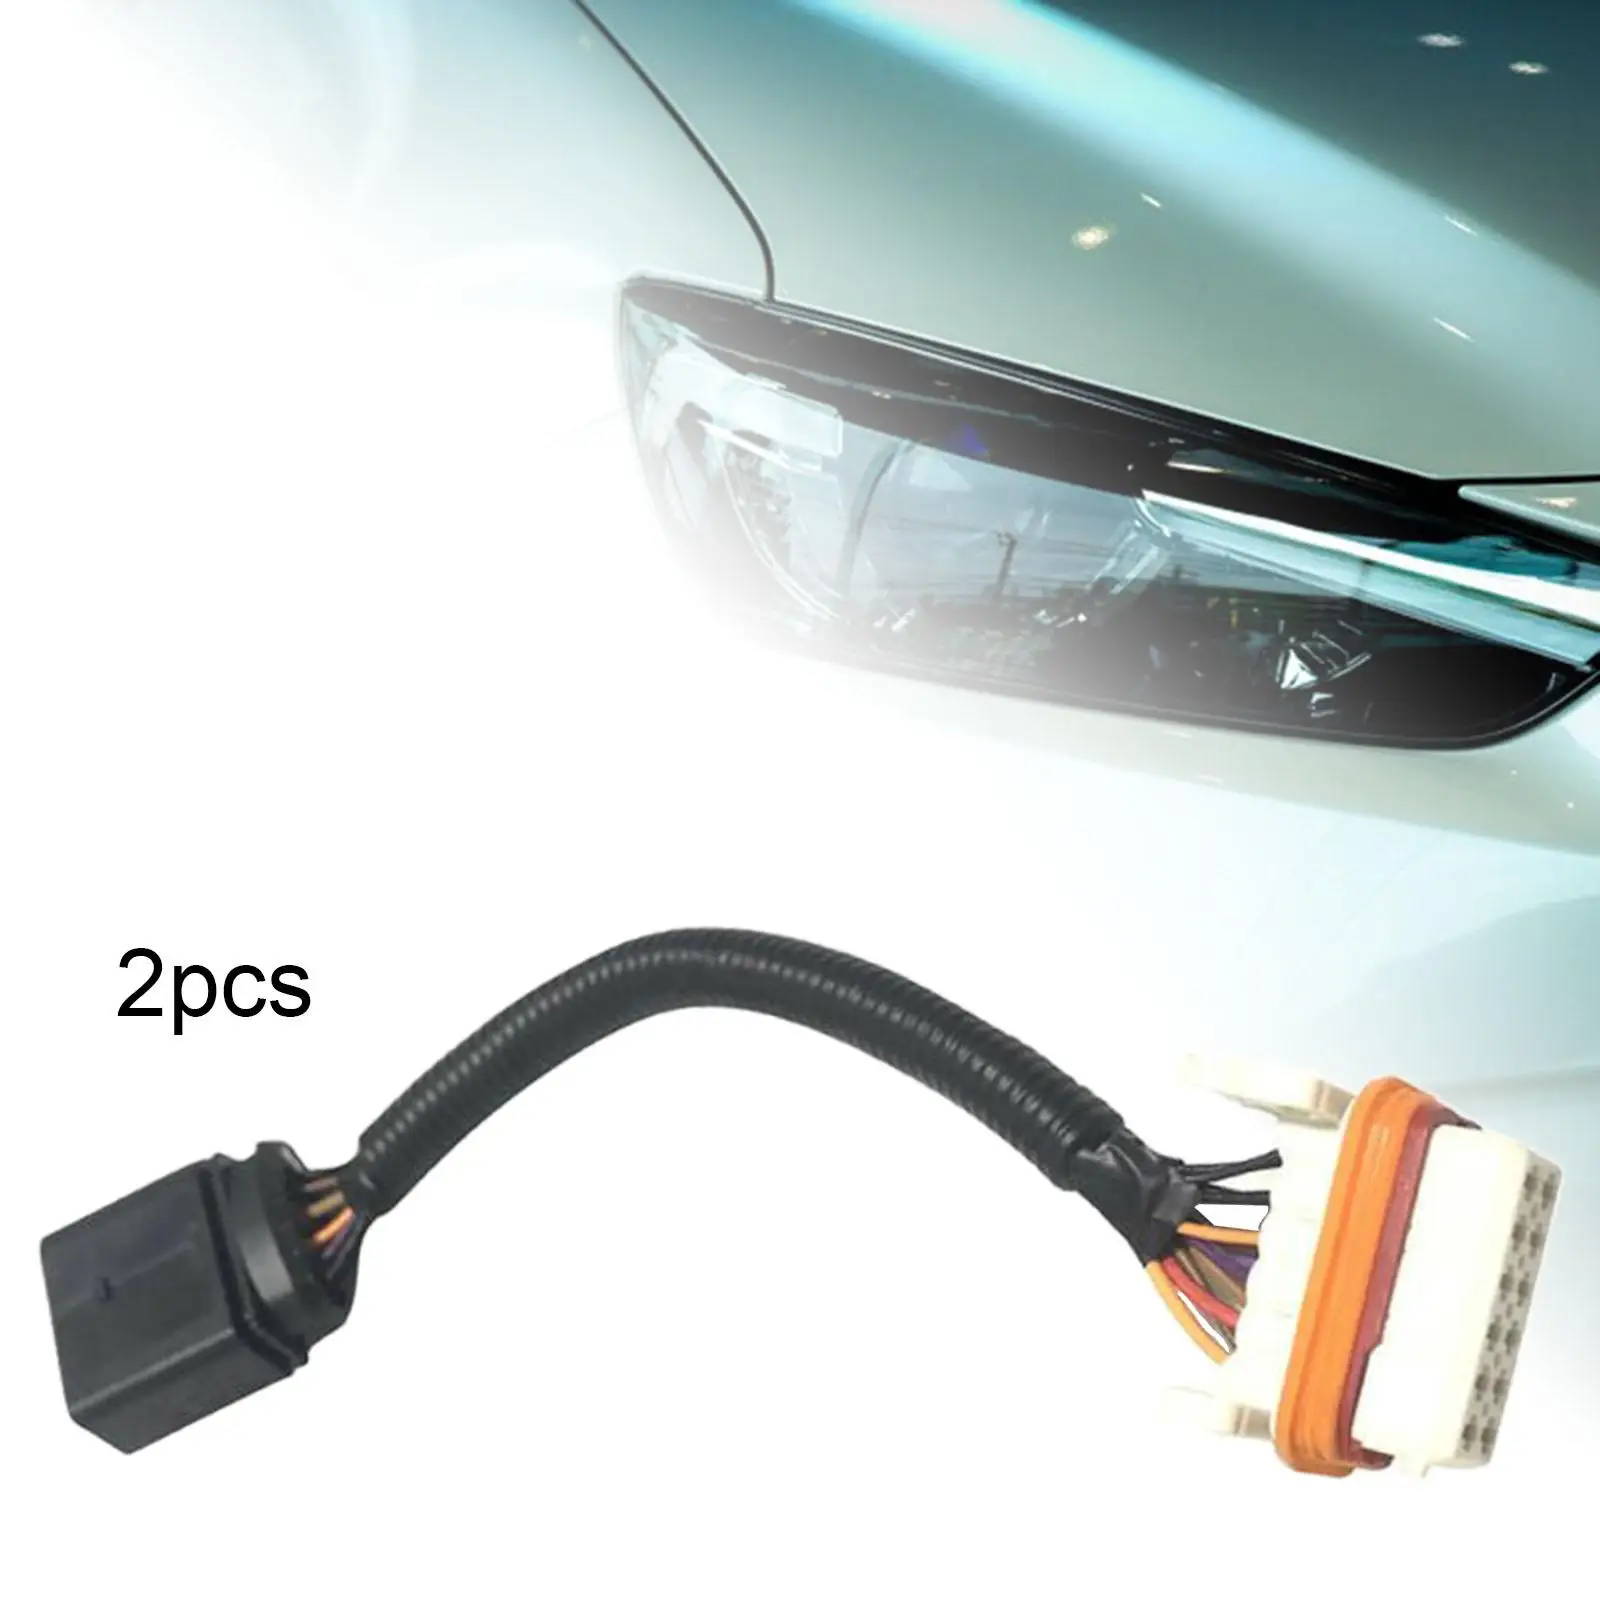 Headlight Wiring Harness Adapter, 7L6971071A  Right Lighting Parts Spare Parts Replaces Professional Accessories  